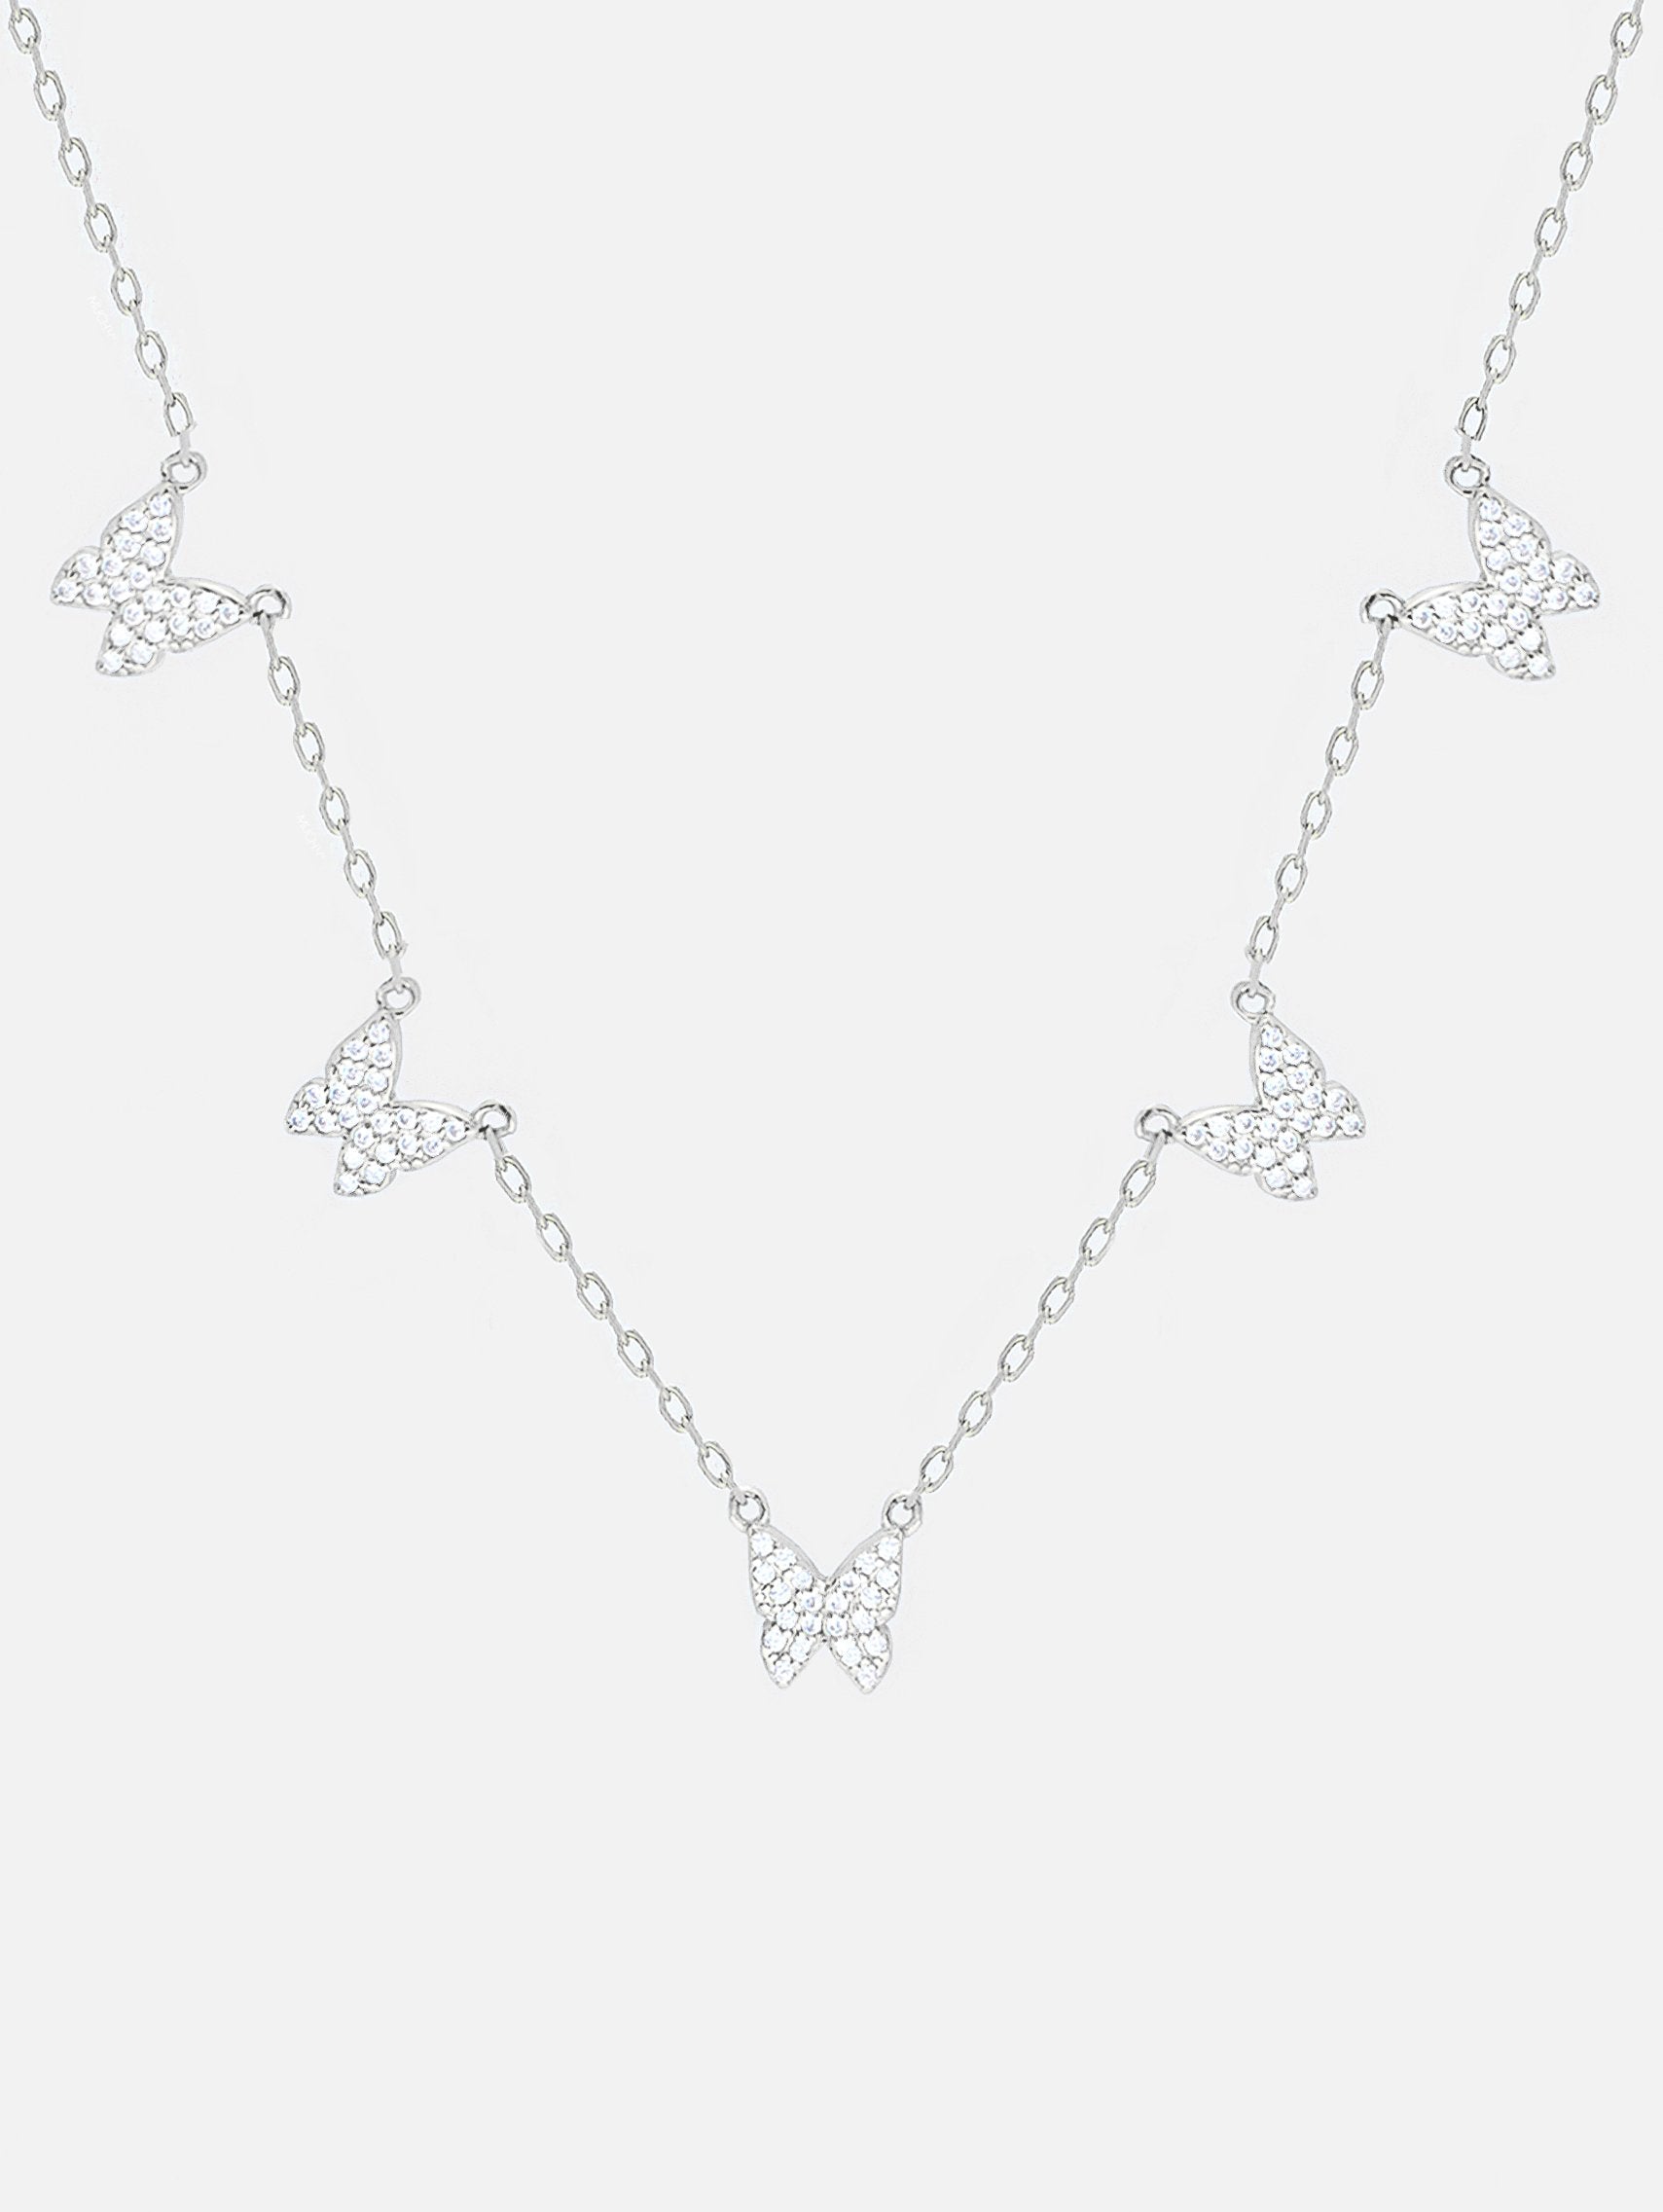 Silver Butterfly Necklace or Choker - Five Sparkling Butterflies (18ct White Gold Plated 925 Sterling Silver) - Muchv Jewellery